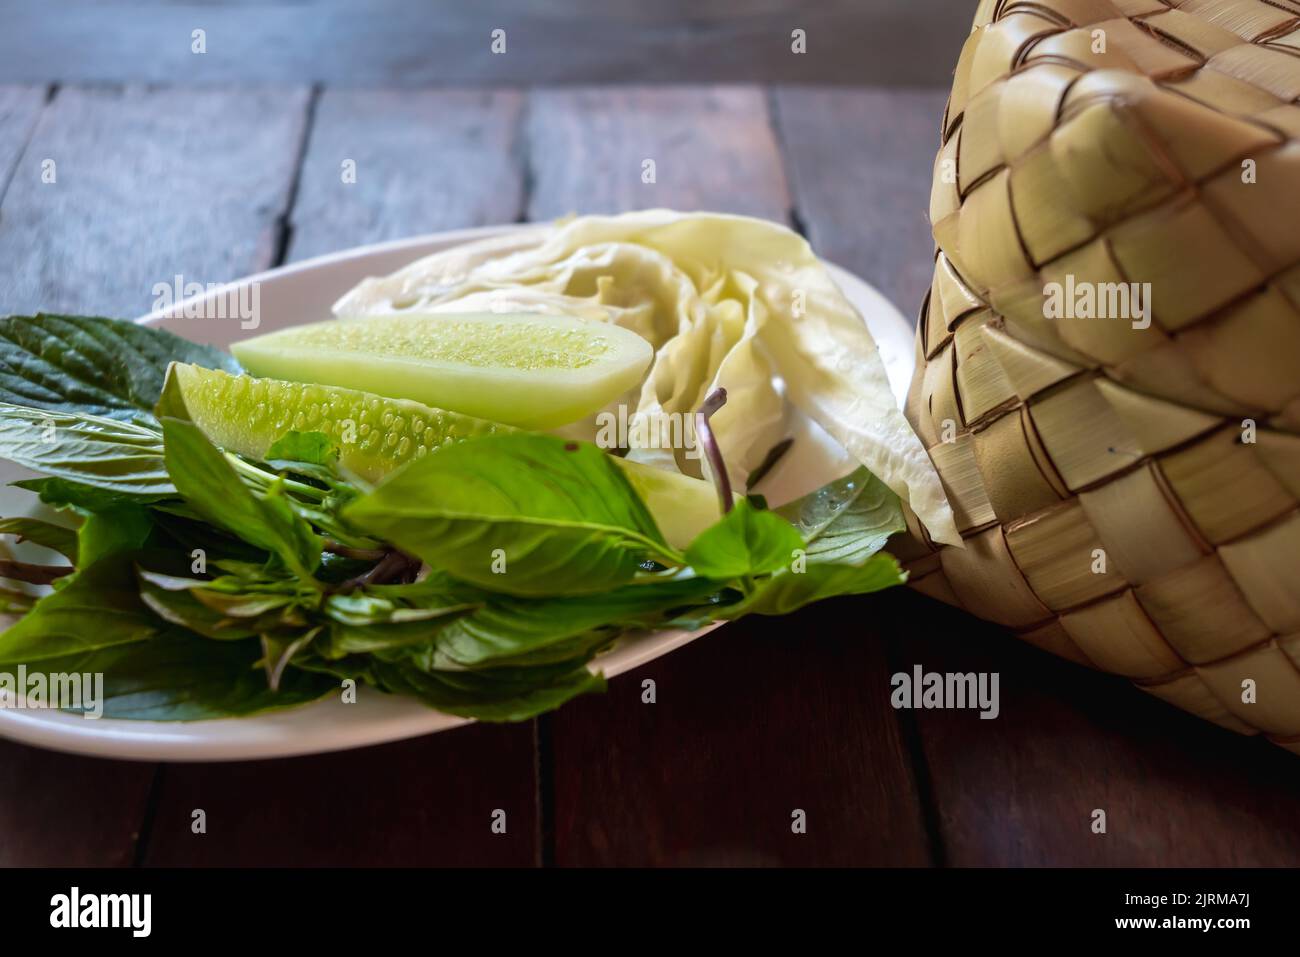 https://c8.alamy.com/comp/2JRMA7J/bamboo-wicker-sticky-rice-basket-called-kratip-in-the-northeastern-province-thailand-served-with-a-vegetable-side-dish-on-the-wooden-table-2JRMA7J.jpg